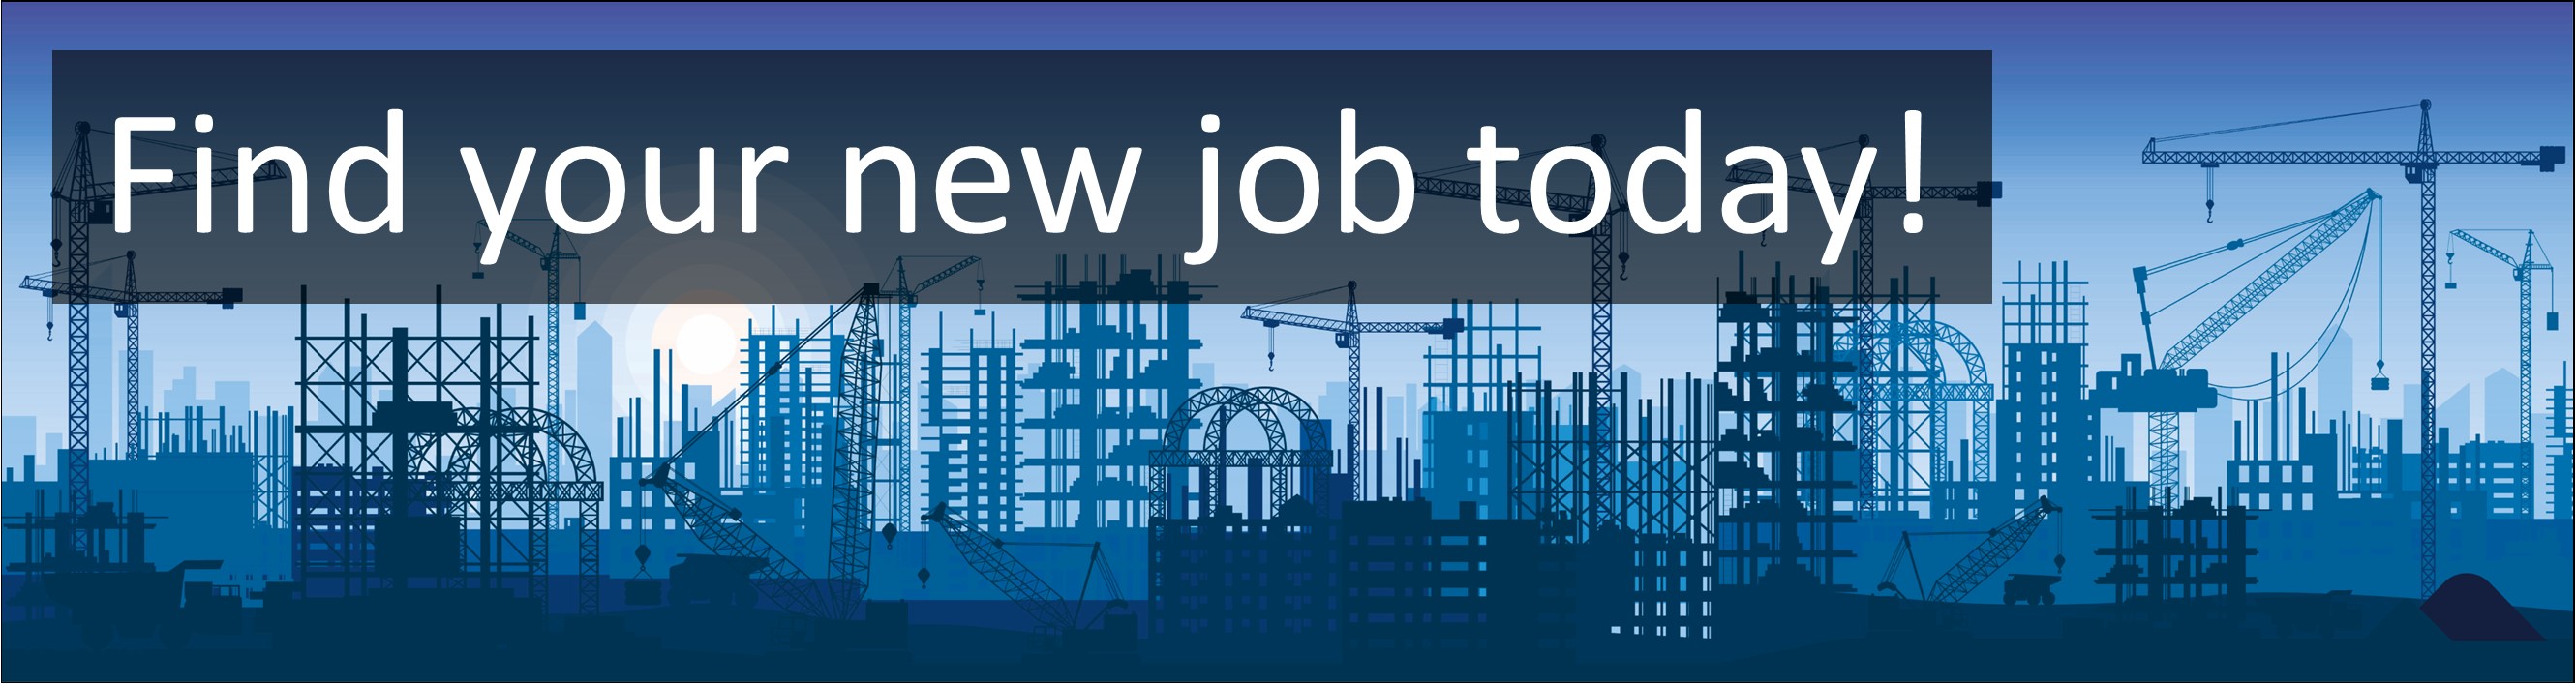 Construction & Trades Jobs. Carpenter / Bench Joiner Carpentry / Joinery Jobs, Careers & Vacancies in Plymouth, Devon, South West England Advertised by AWD online – Multi-Job Board Advertising and CV Sourcing Recruitment Services